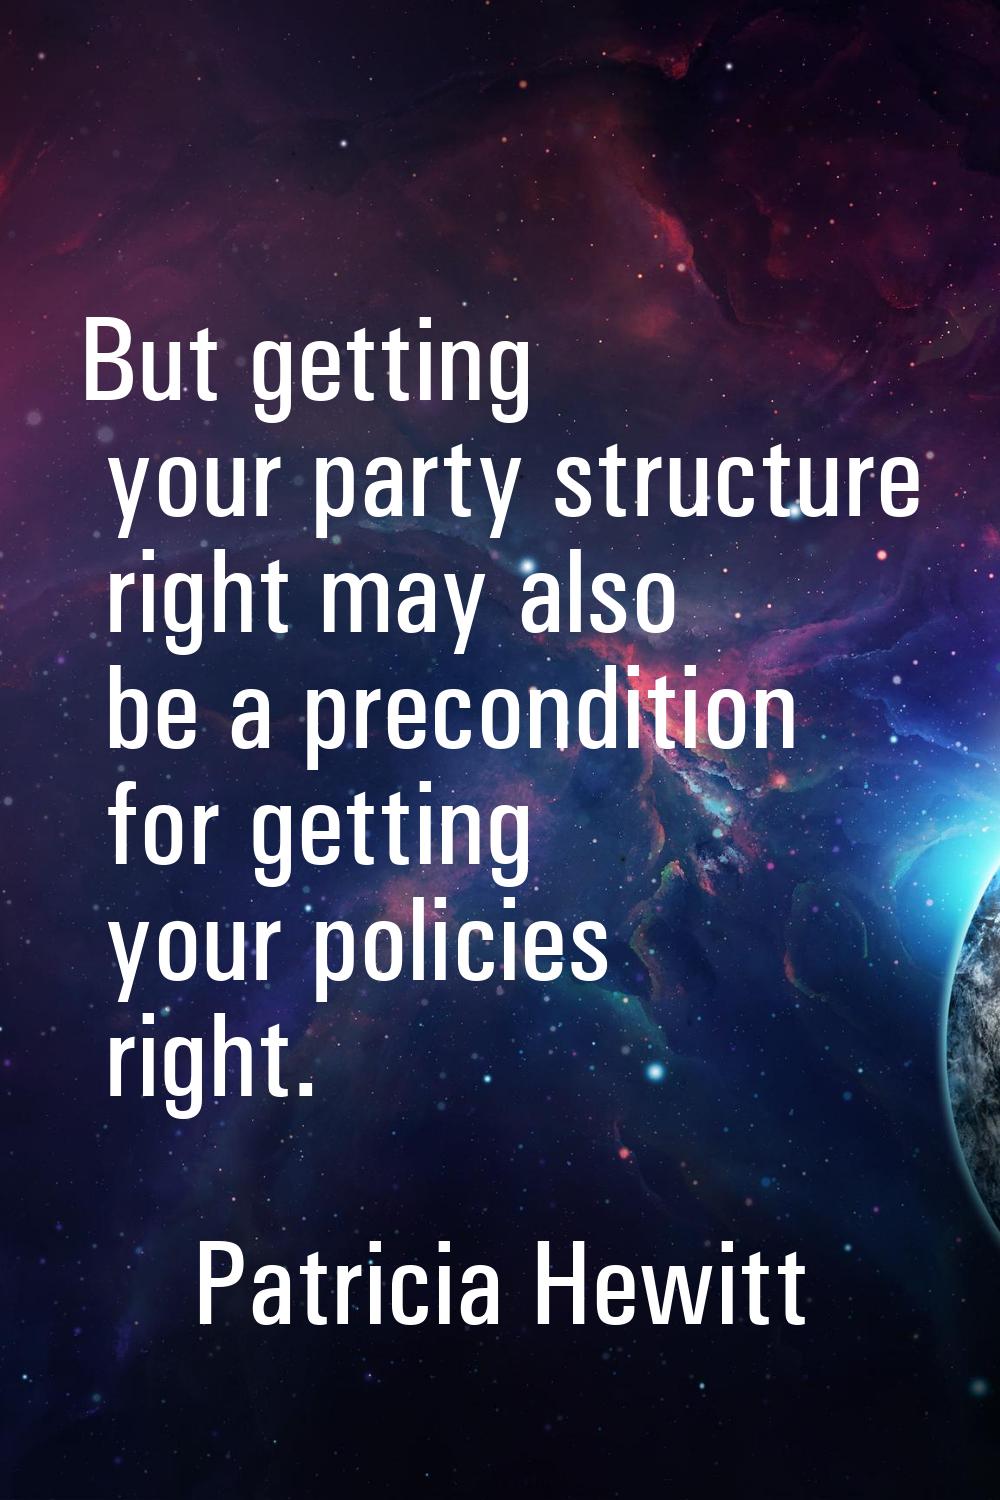 But getting your party structure right may also be a precondition for getting your policies right.